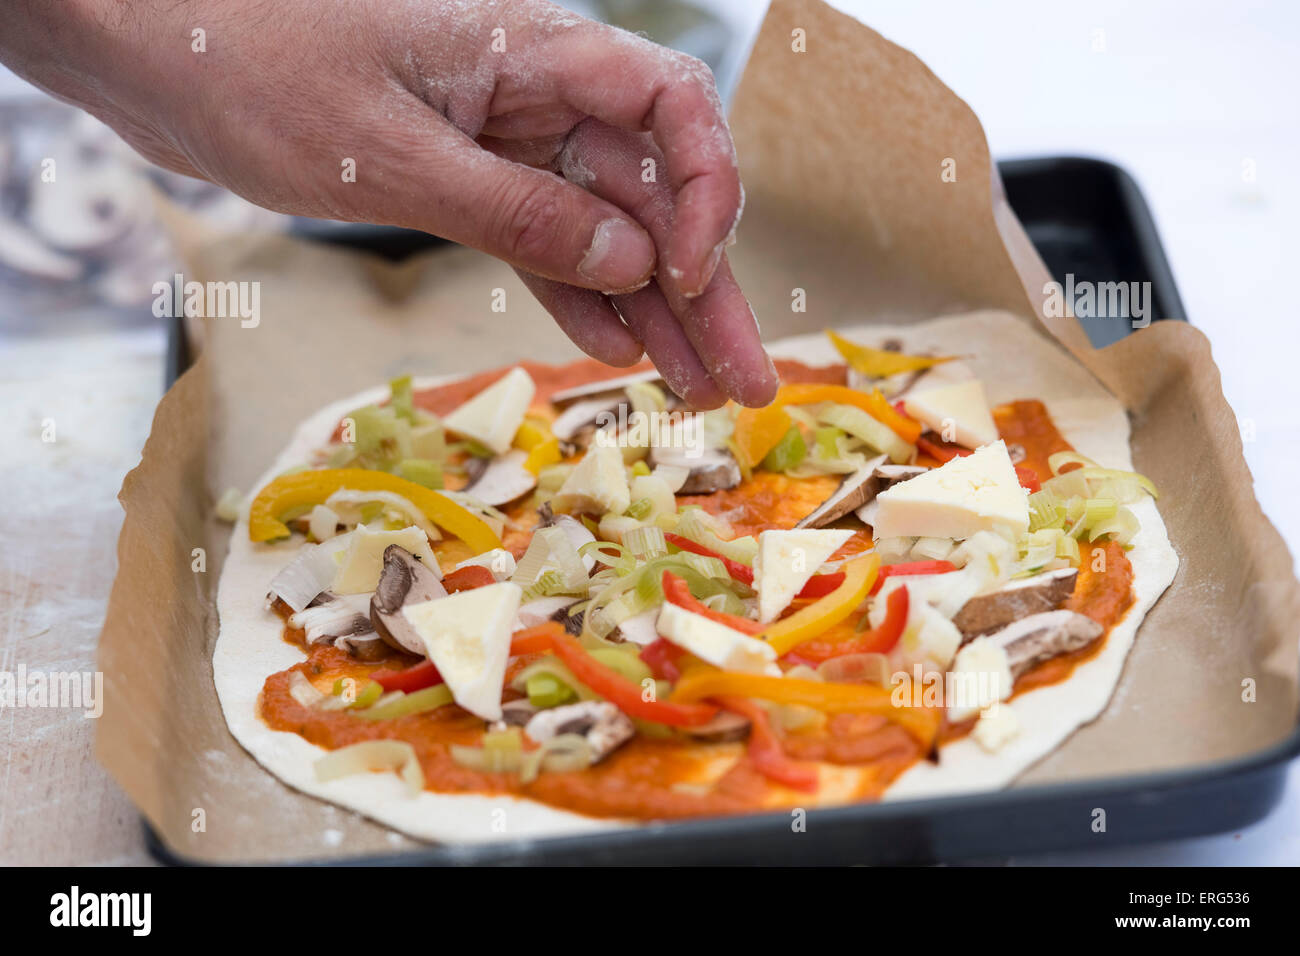 Vegetarian pizza being made in a baking tray. Stock Photo